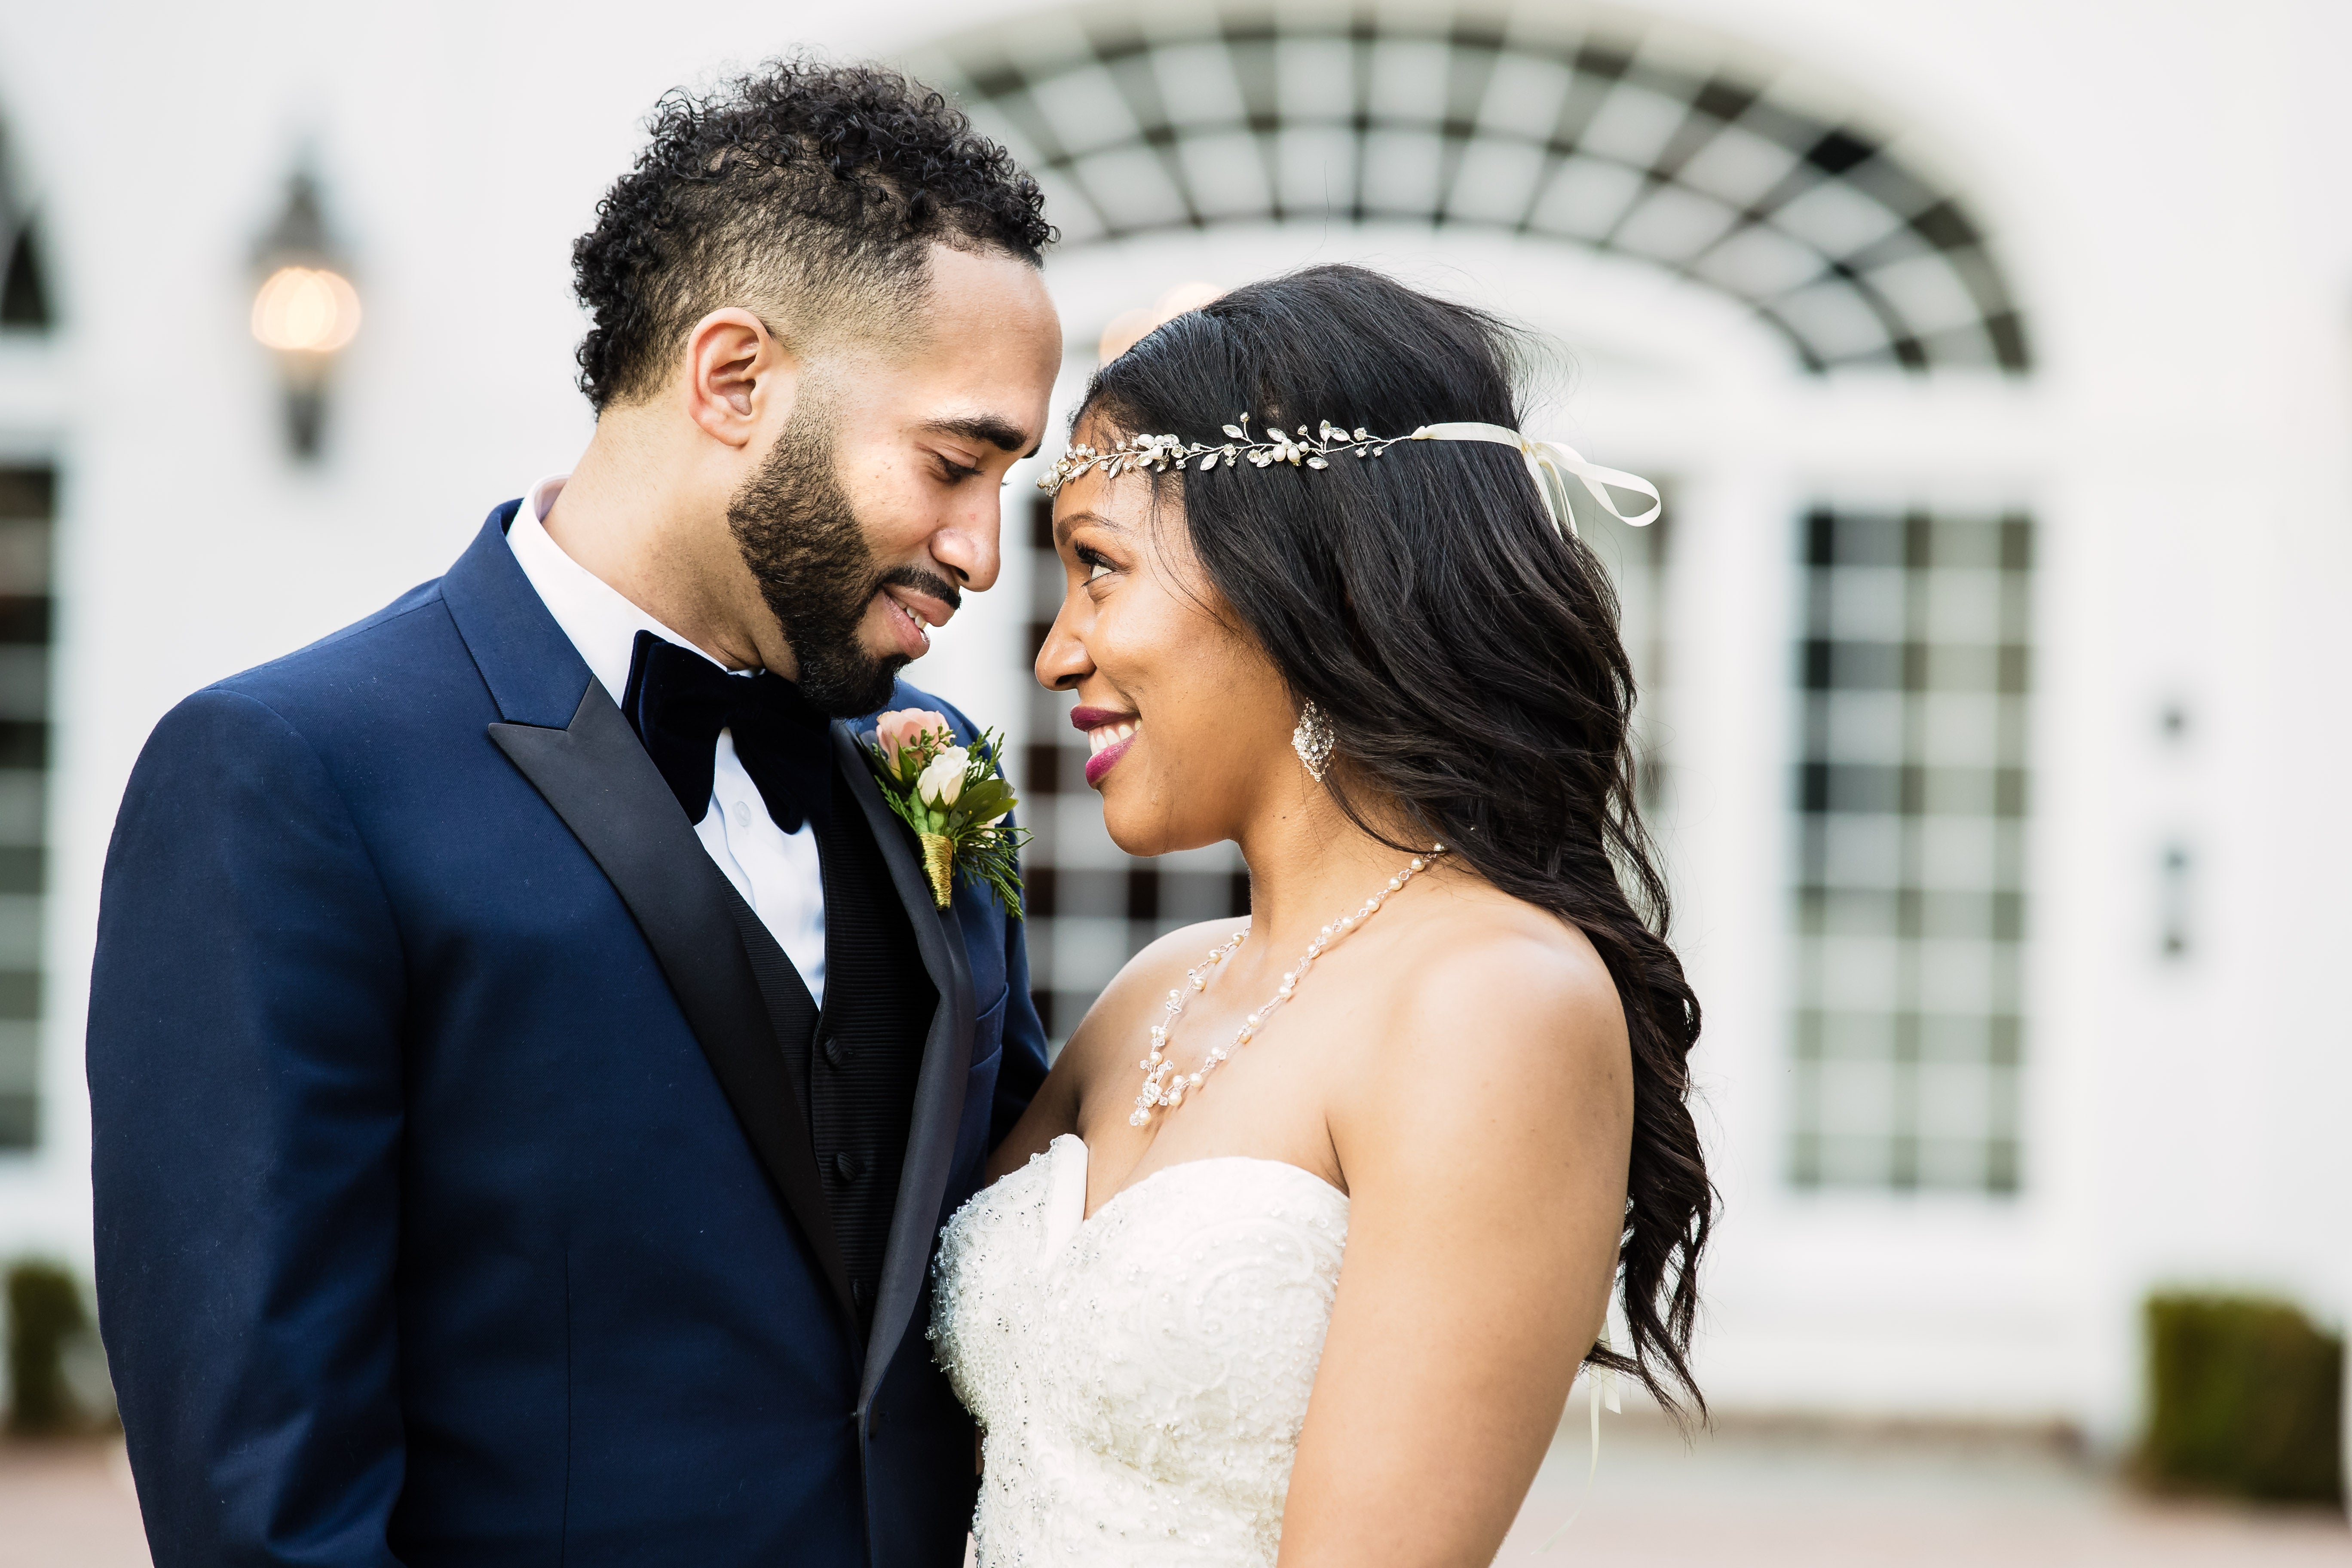 Bridal Bliss: Curtis And Aisha's Wedding Was As Romantic As It Gets
